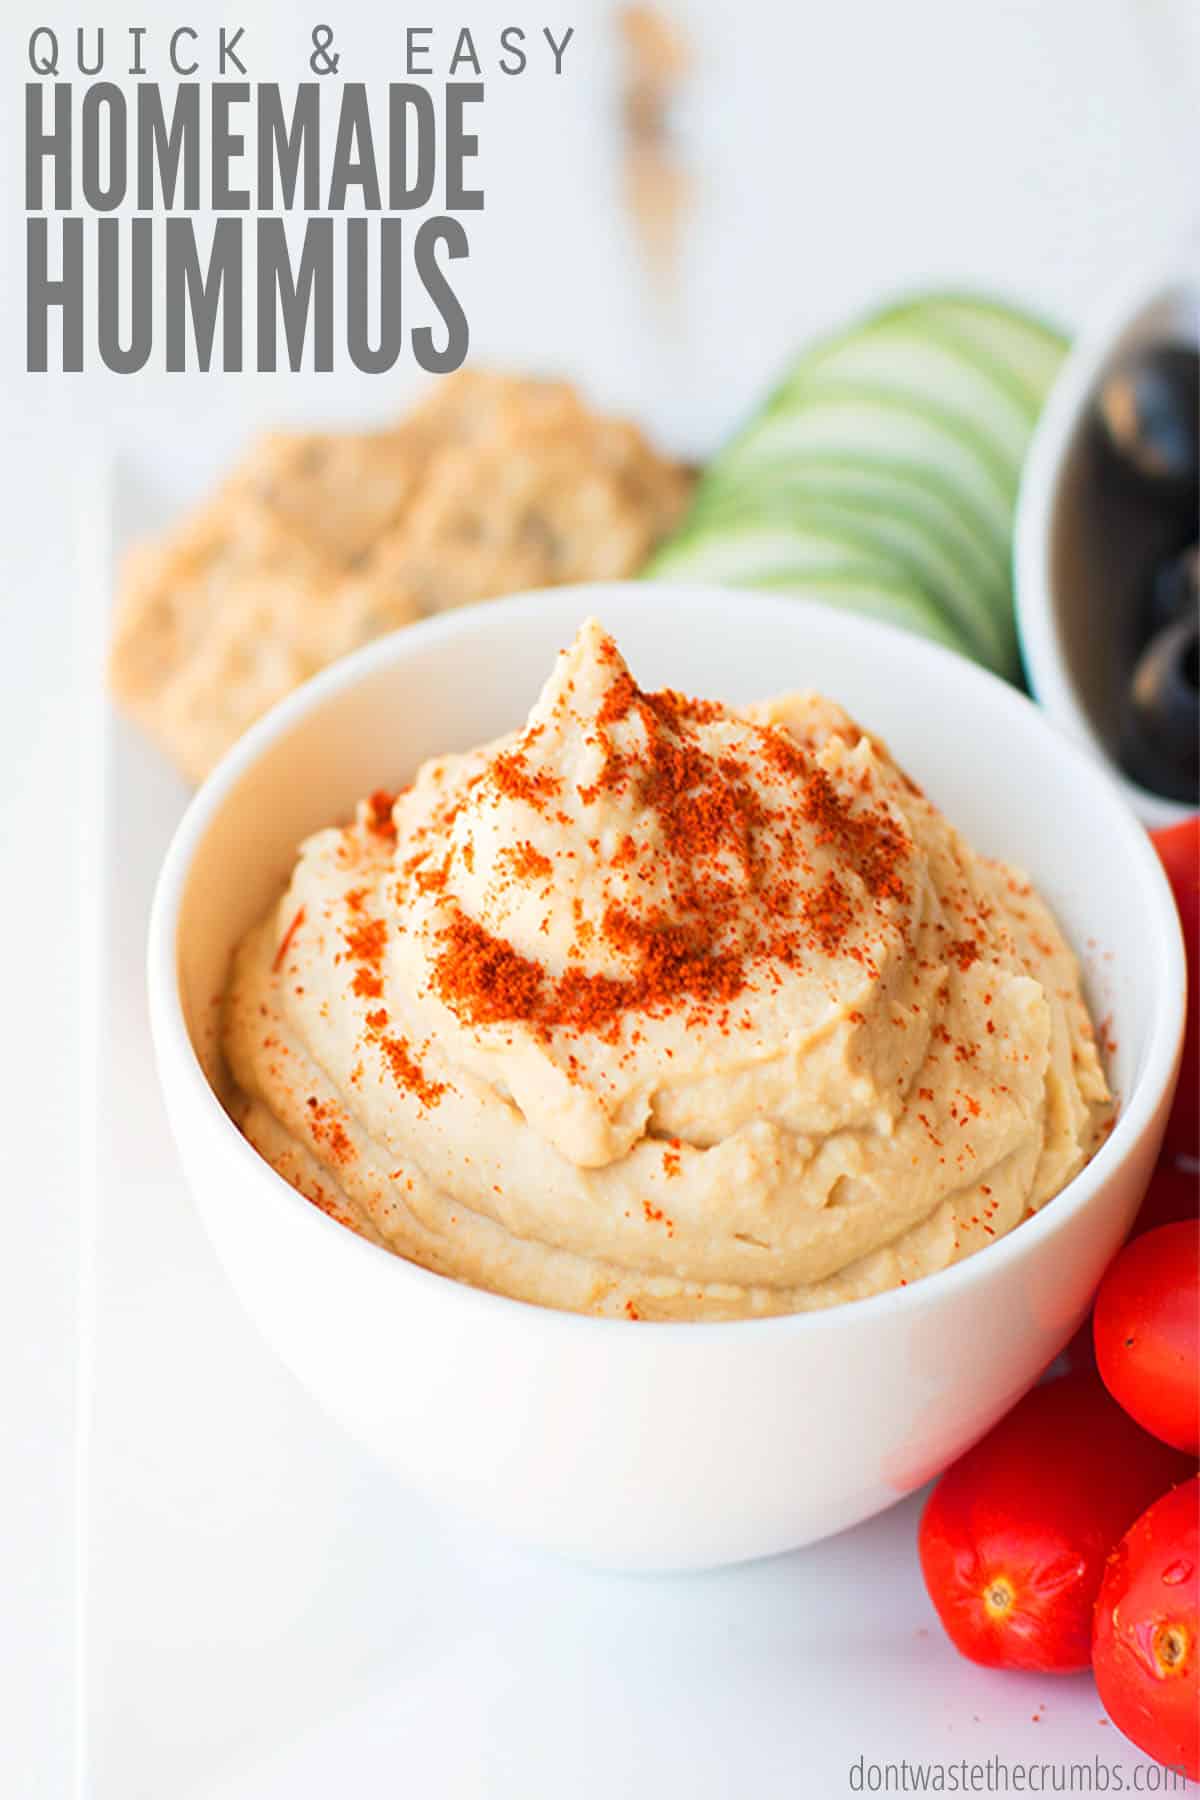 A small bowl of freshly made hummus topped with cayenne pepper. There are crackers, and sliced raw veggies on the side. The text overlay reads "Quick & Easy Homemade Hummus."